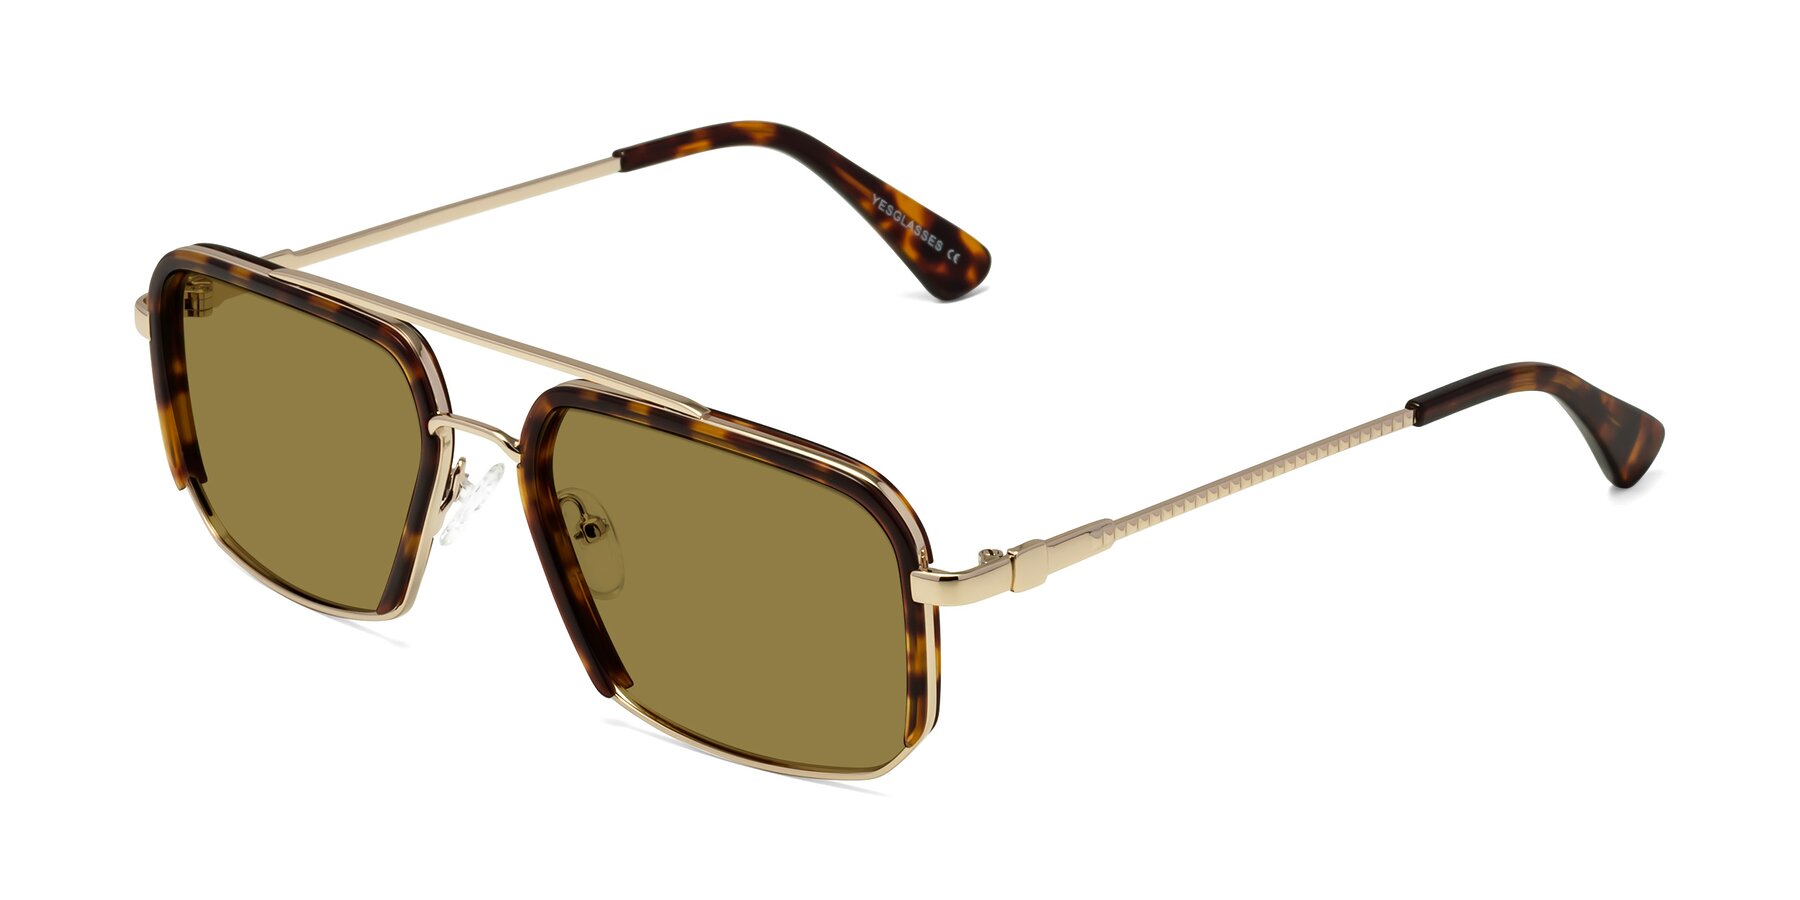 Angle of Dechter in Tortoise-Gold with Brown Polarized Lenses